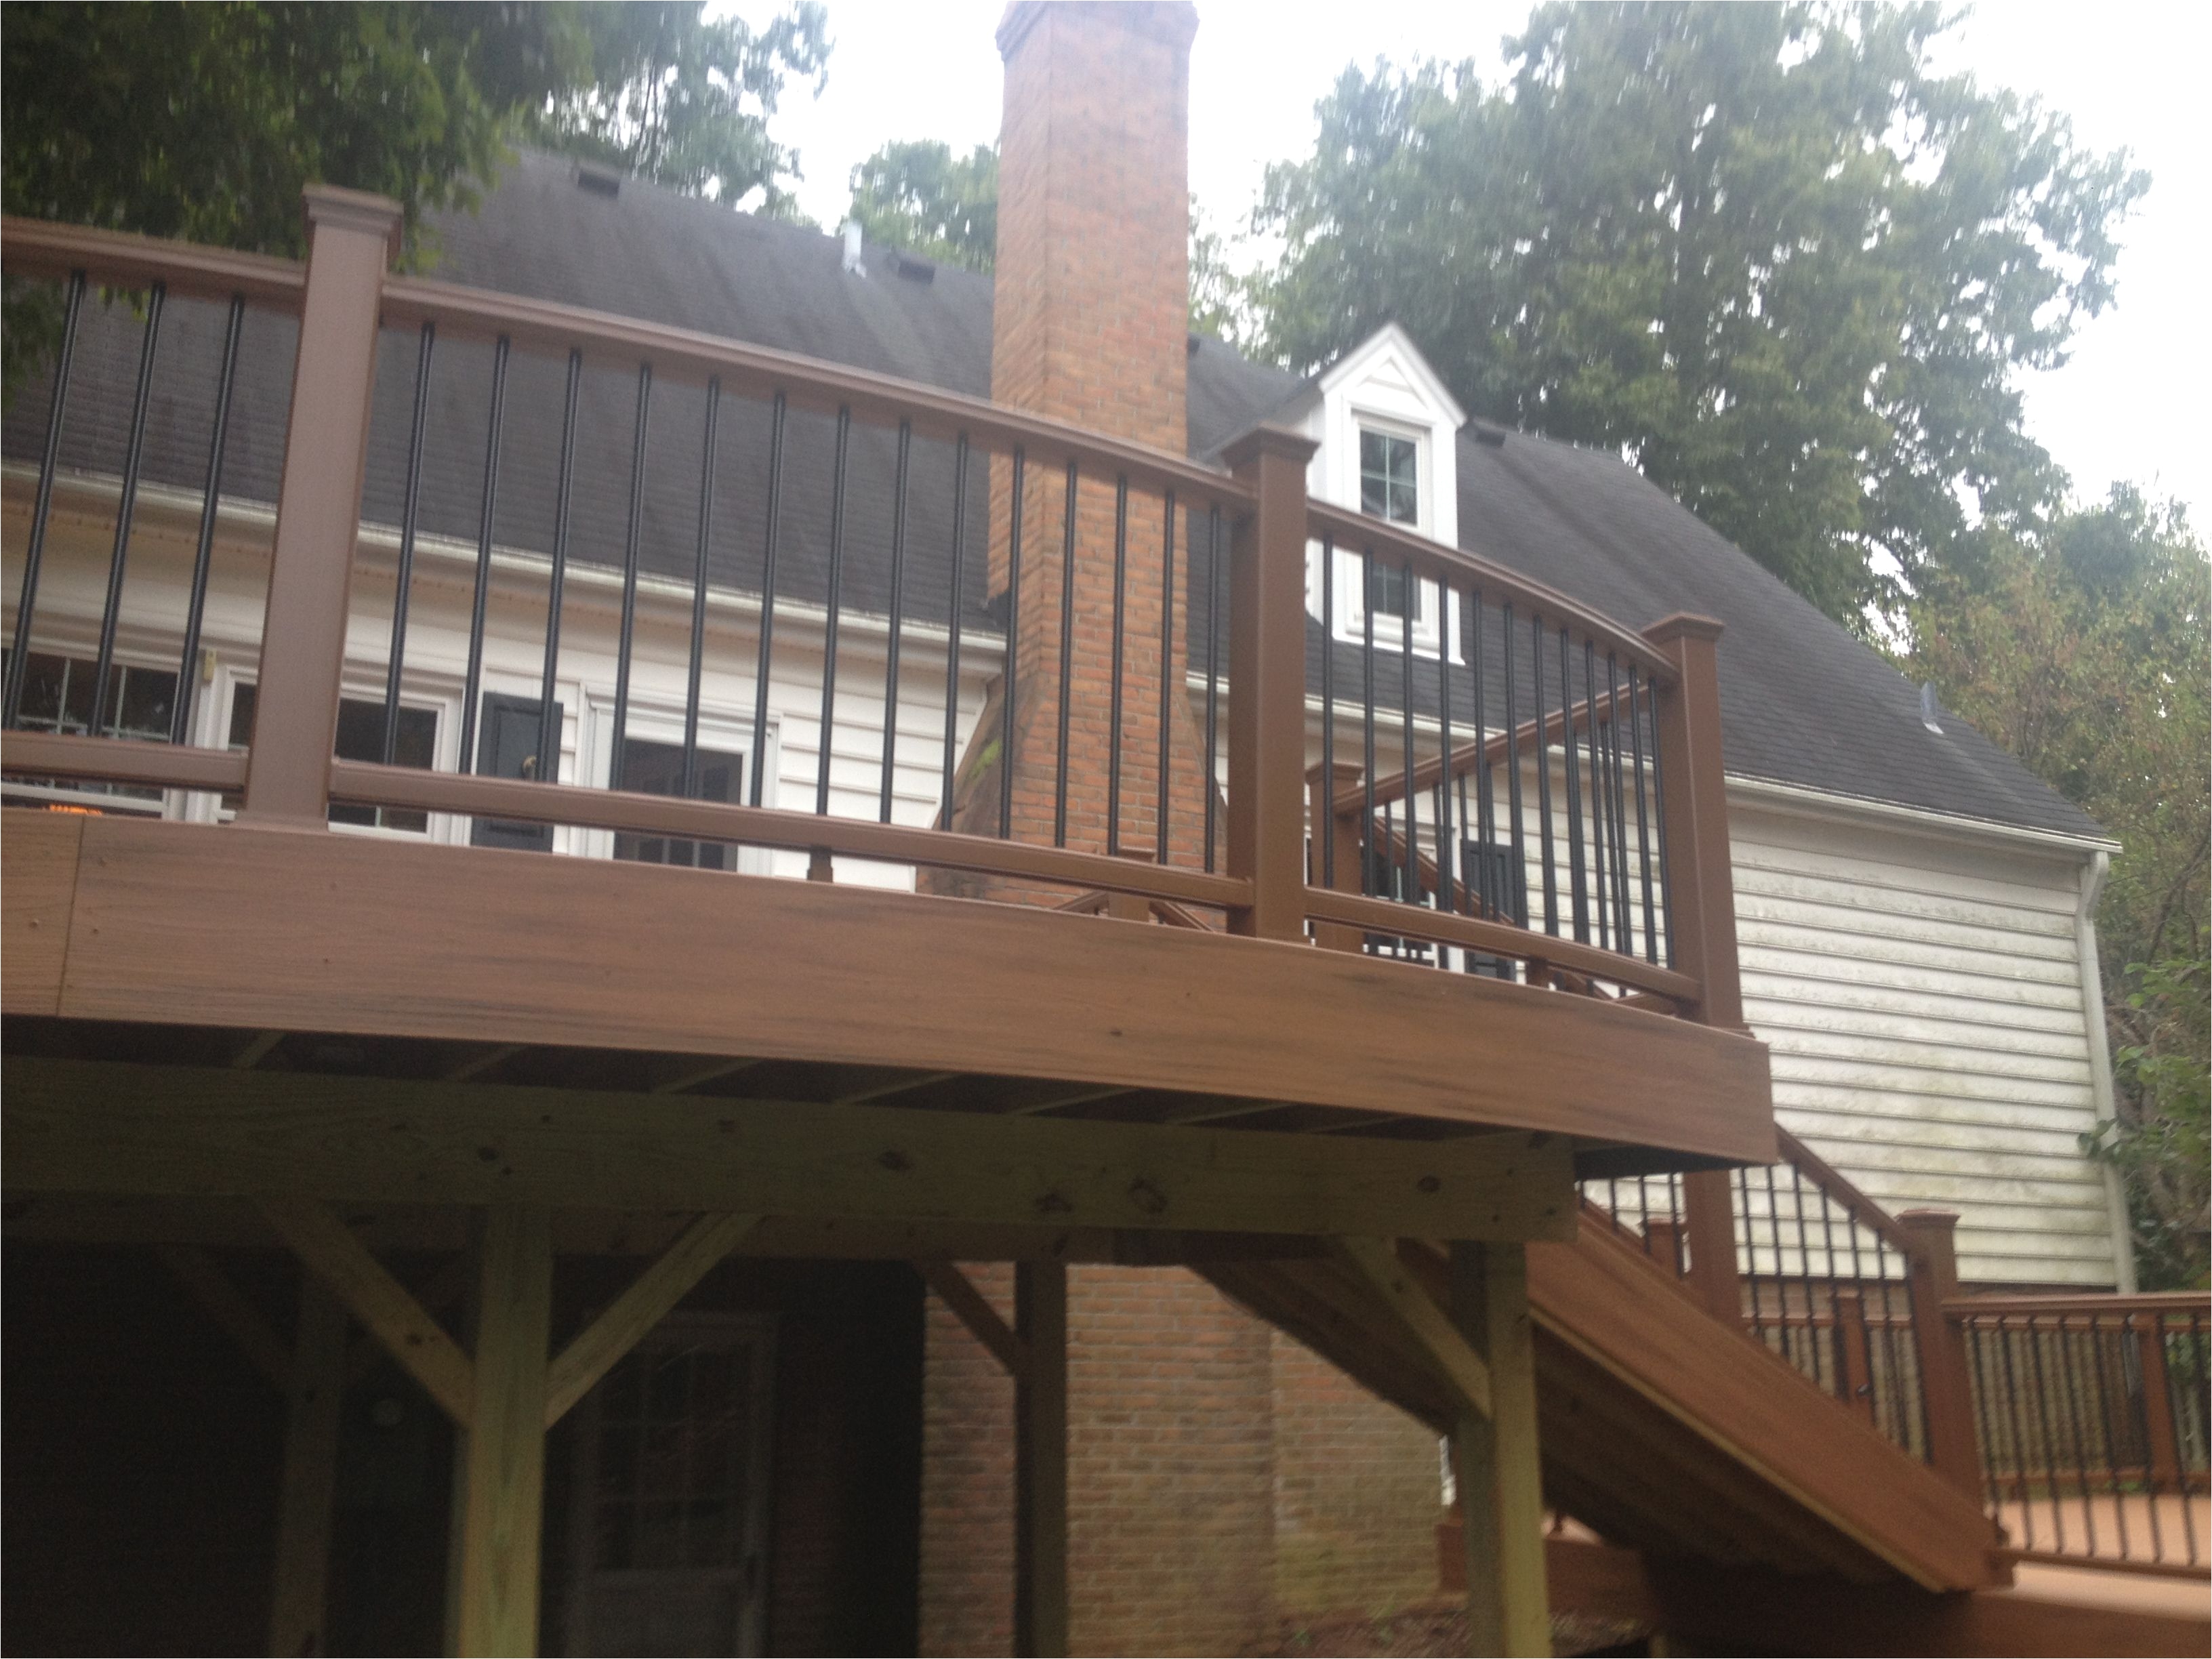 curved decking and railing on both levels in tiki torch it has transcends railing in treehouse with black aluminum spindles and build in post lights